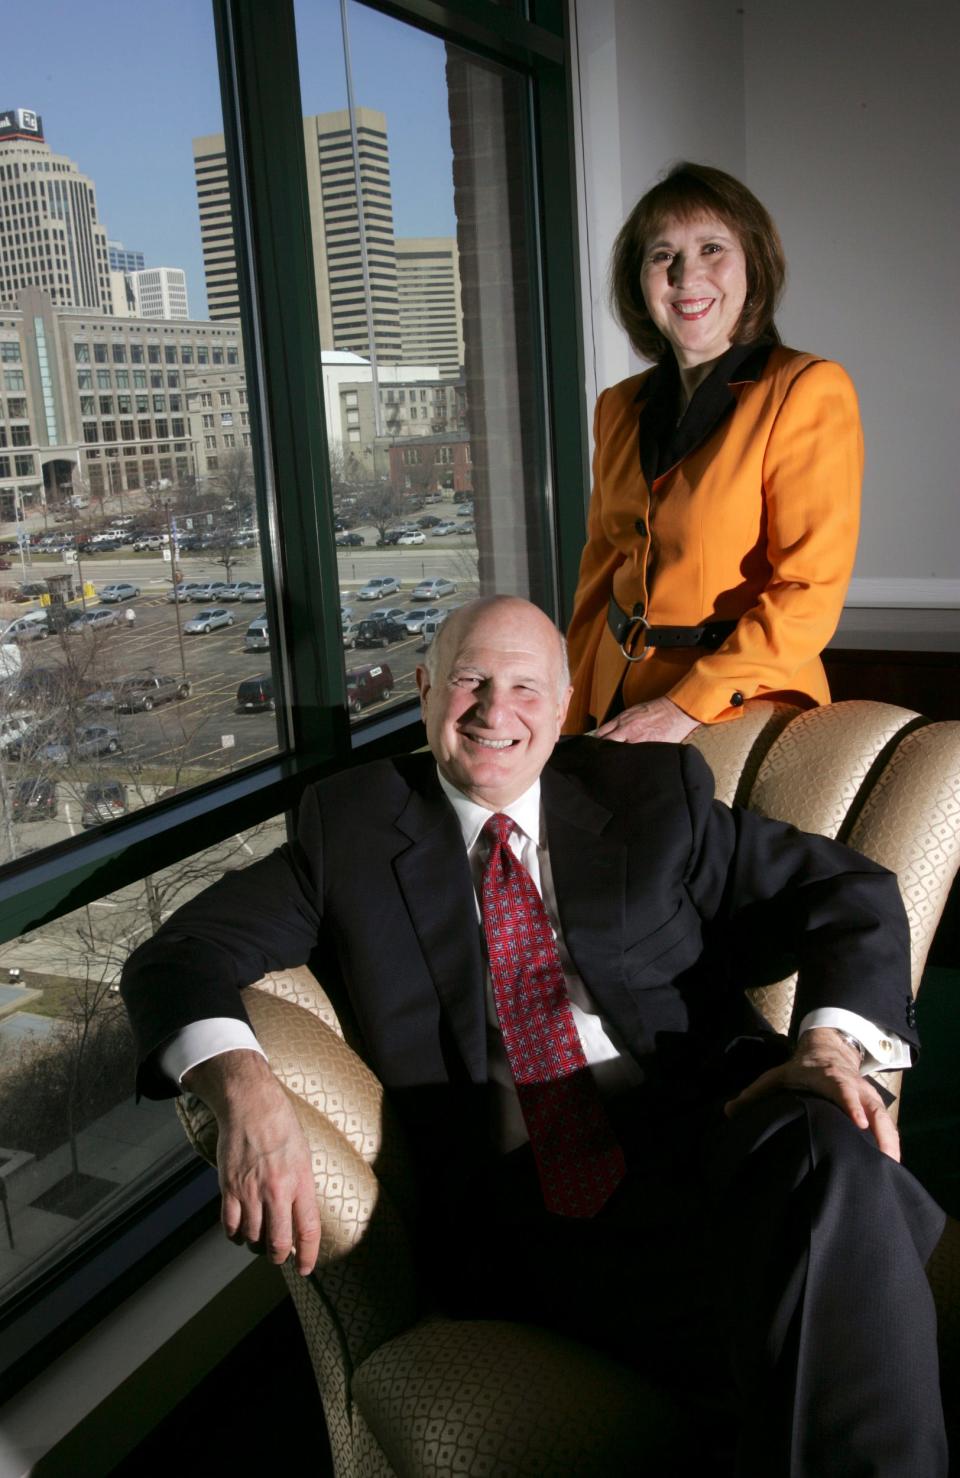 Archive photo: (MILENTHAL ROSE LEWIS 3/20/07) David and Bonnie Milenthal formed the Milenthal Group focusing on strategy and communications. (DISPATCH photo by SHARI LEWIS)